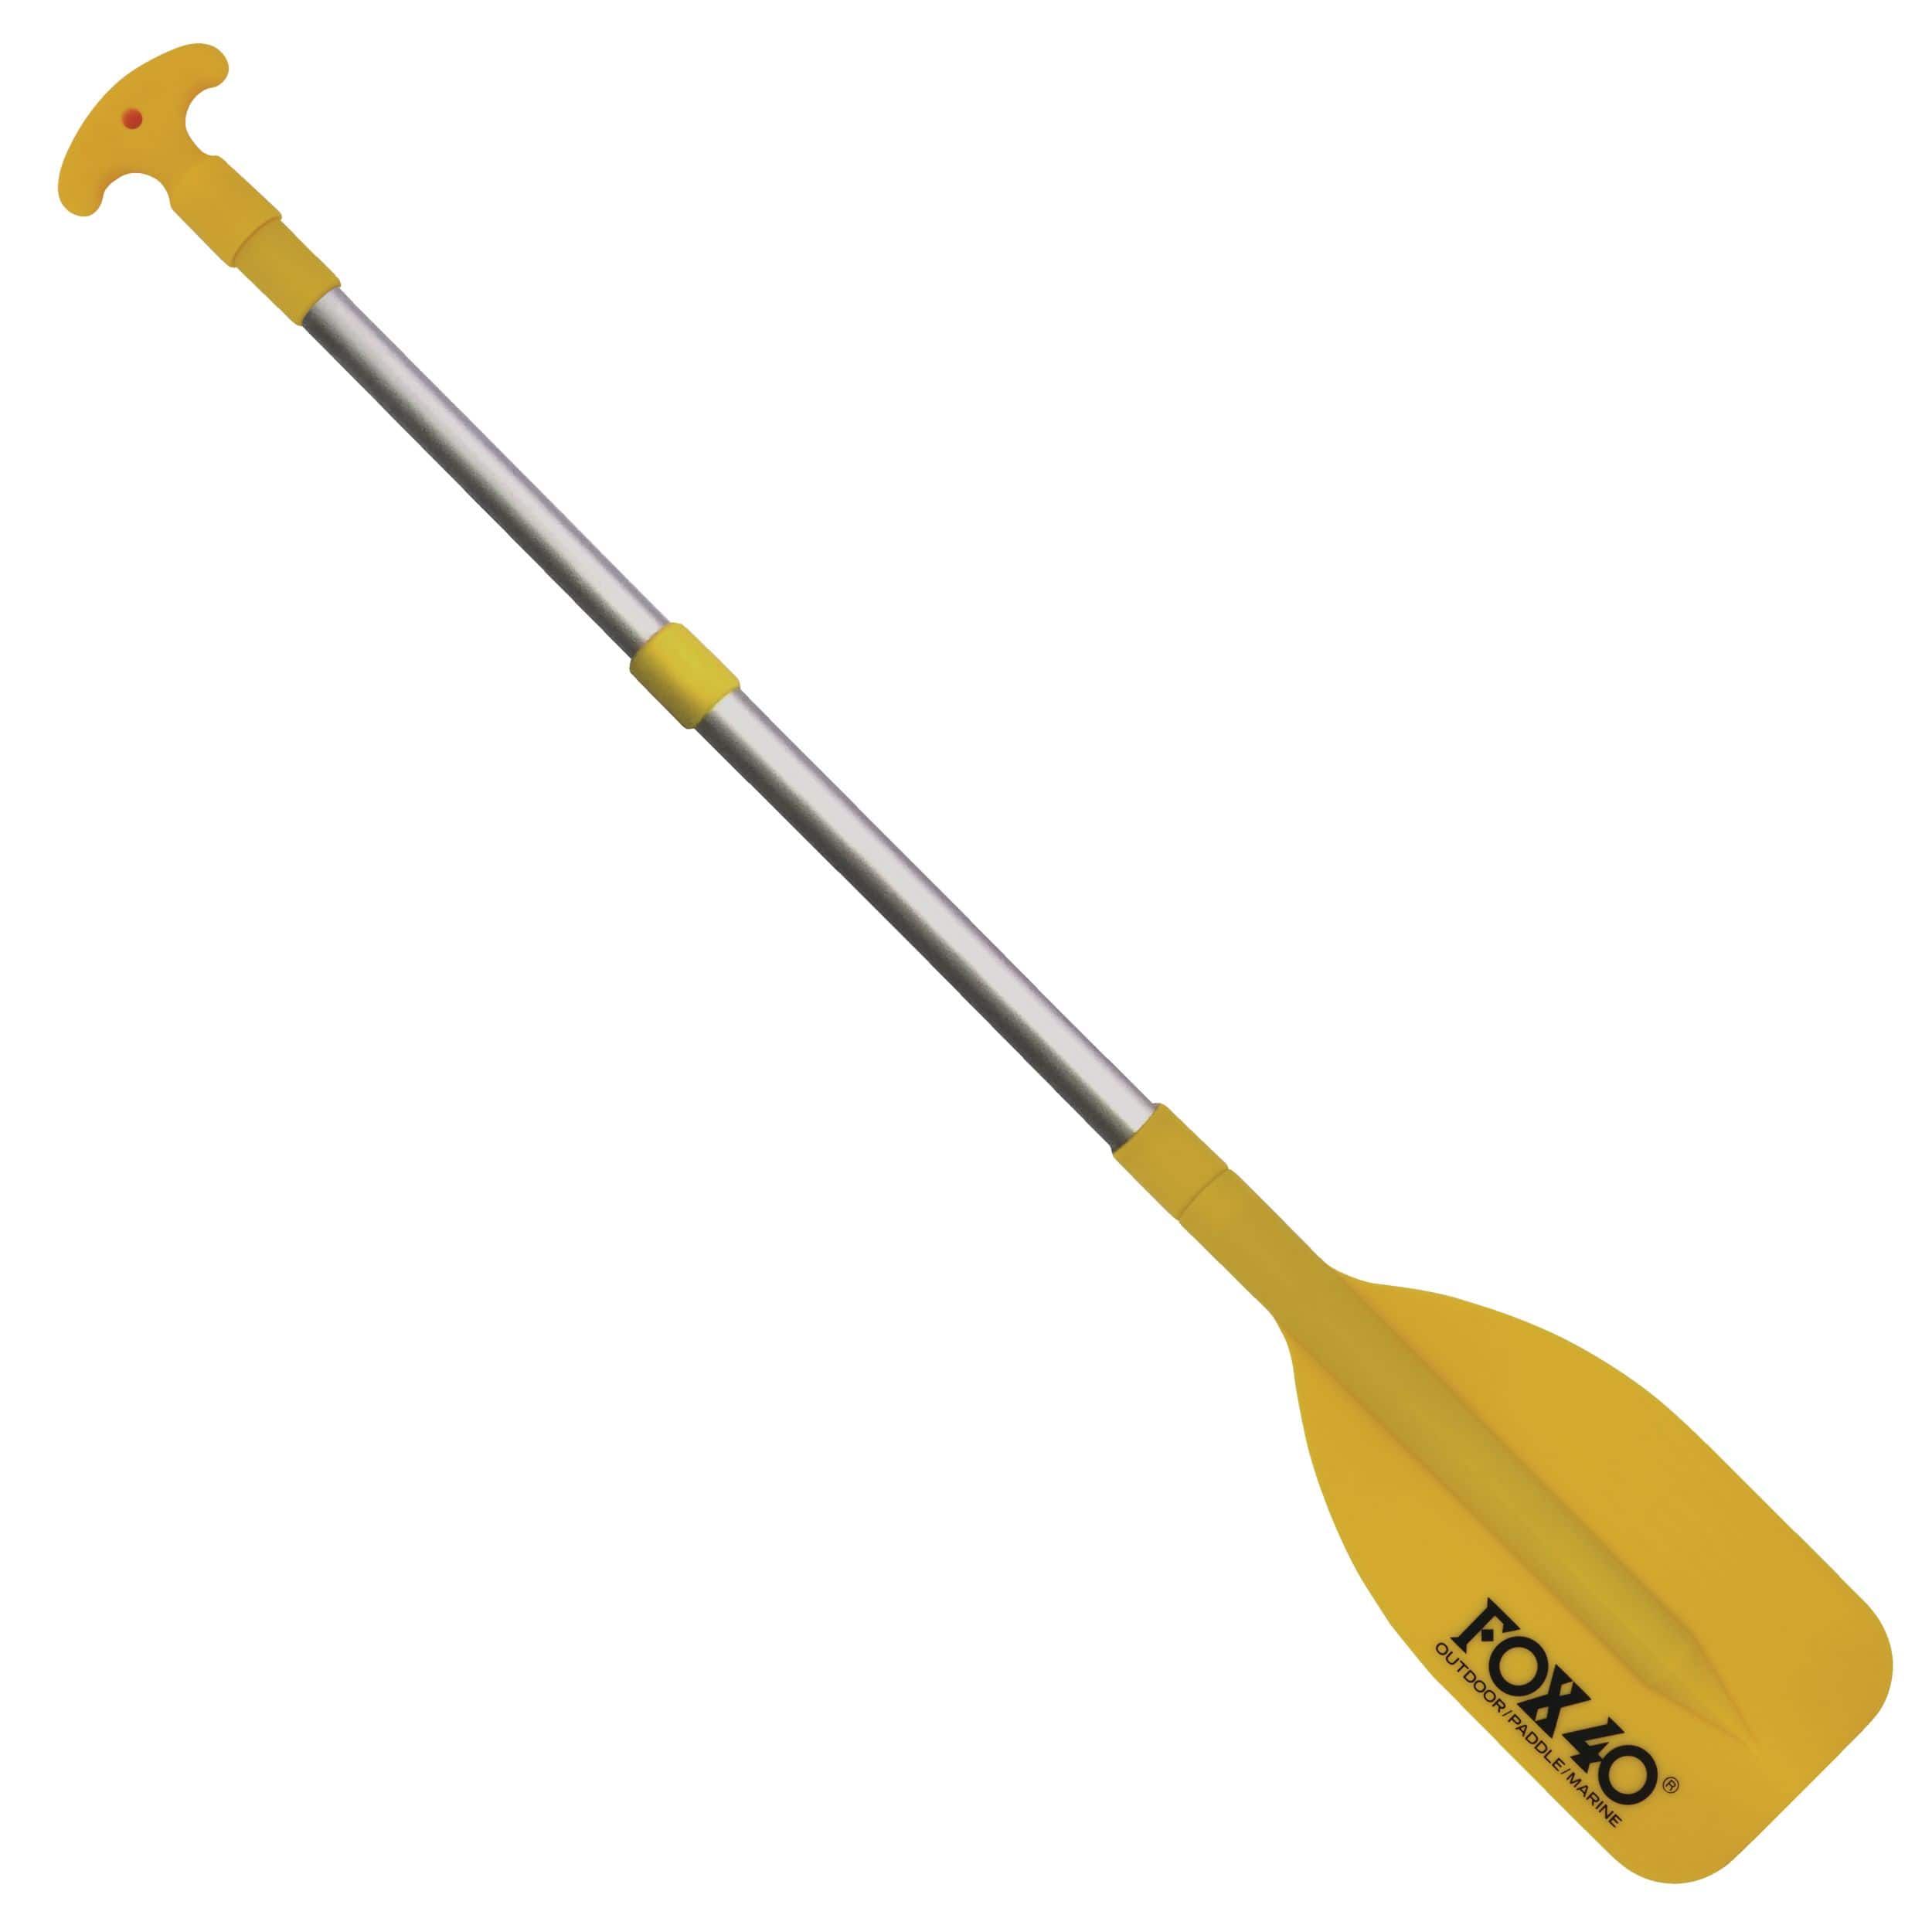 Fox 40 Adjustable Telescopic Mini Paddle with Hook, Yellow, 21 to